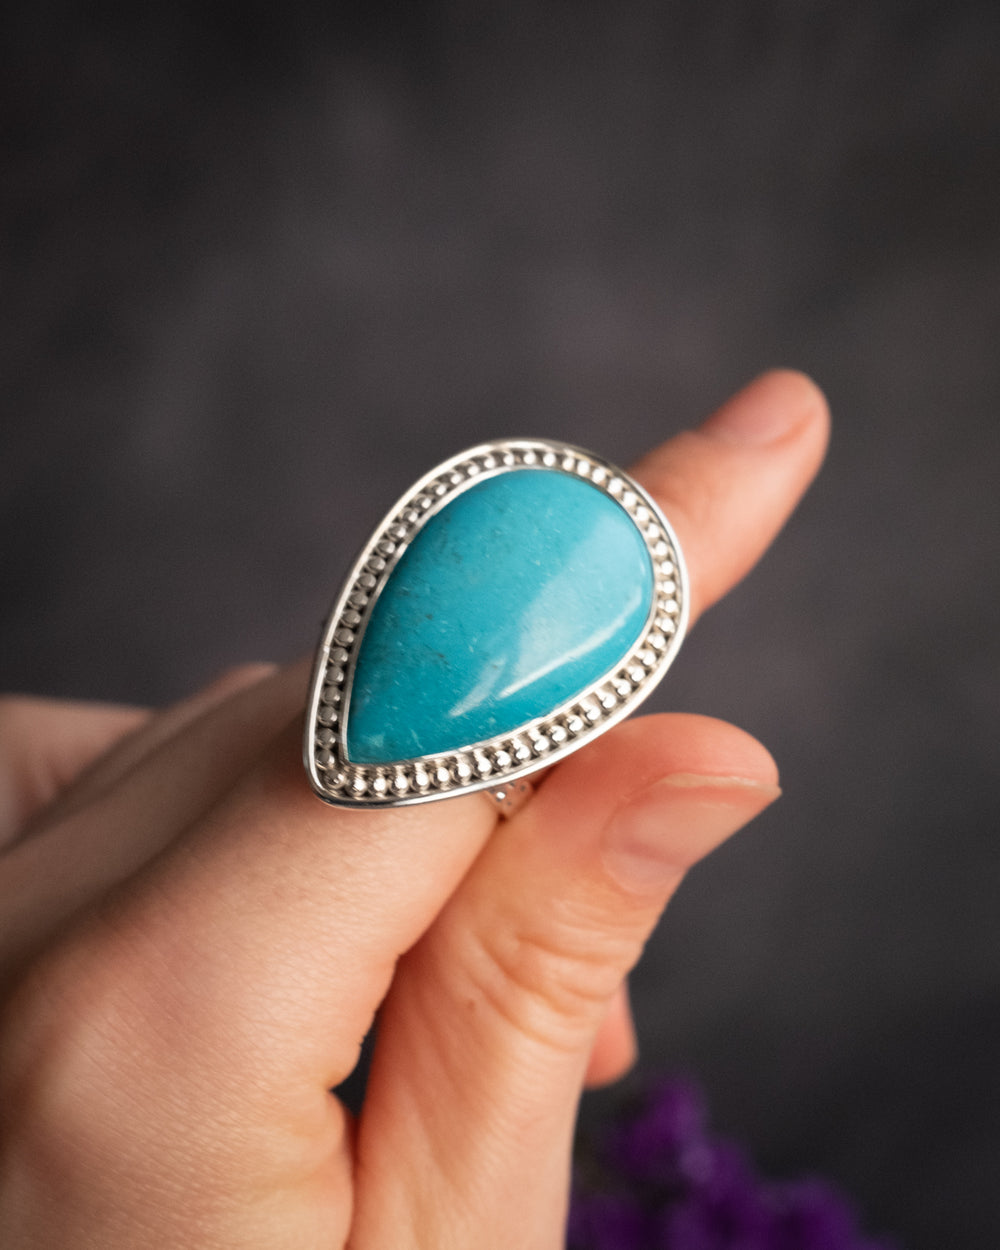 Namibian Chrysocolla Ring in Sterling Silver - Size 9 1/2 US / S 3/4 UK - The Healing Pear